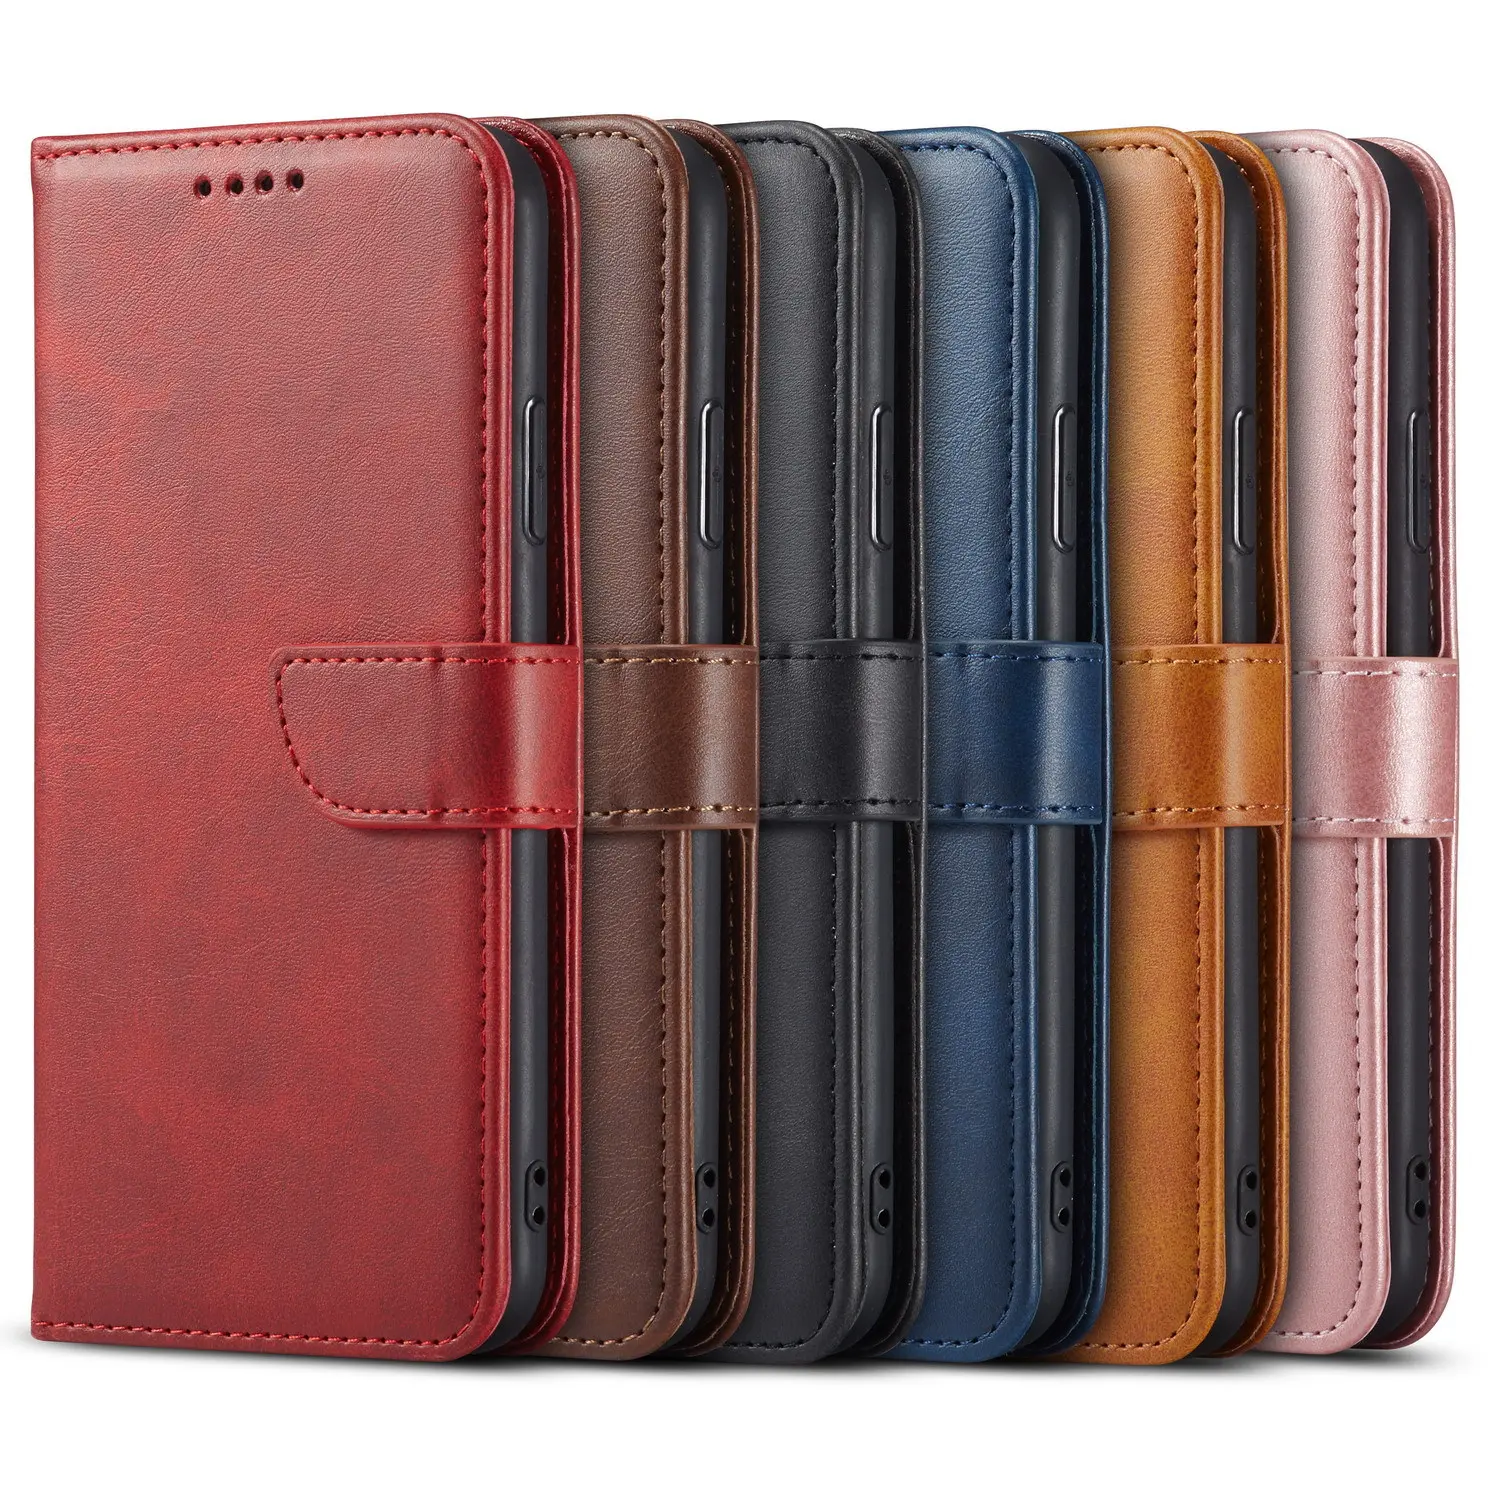 Luxury PU Leather TPU Card Holder Cover Flip Cover Mobile Phone Bags For Samsung S10 S20 S21 S8 S9 Note 10 20 Ultra Wallet Case